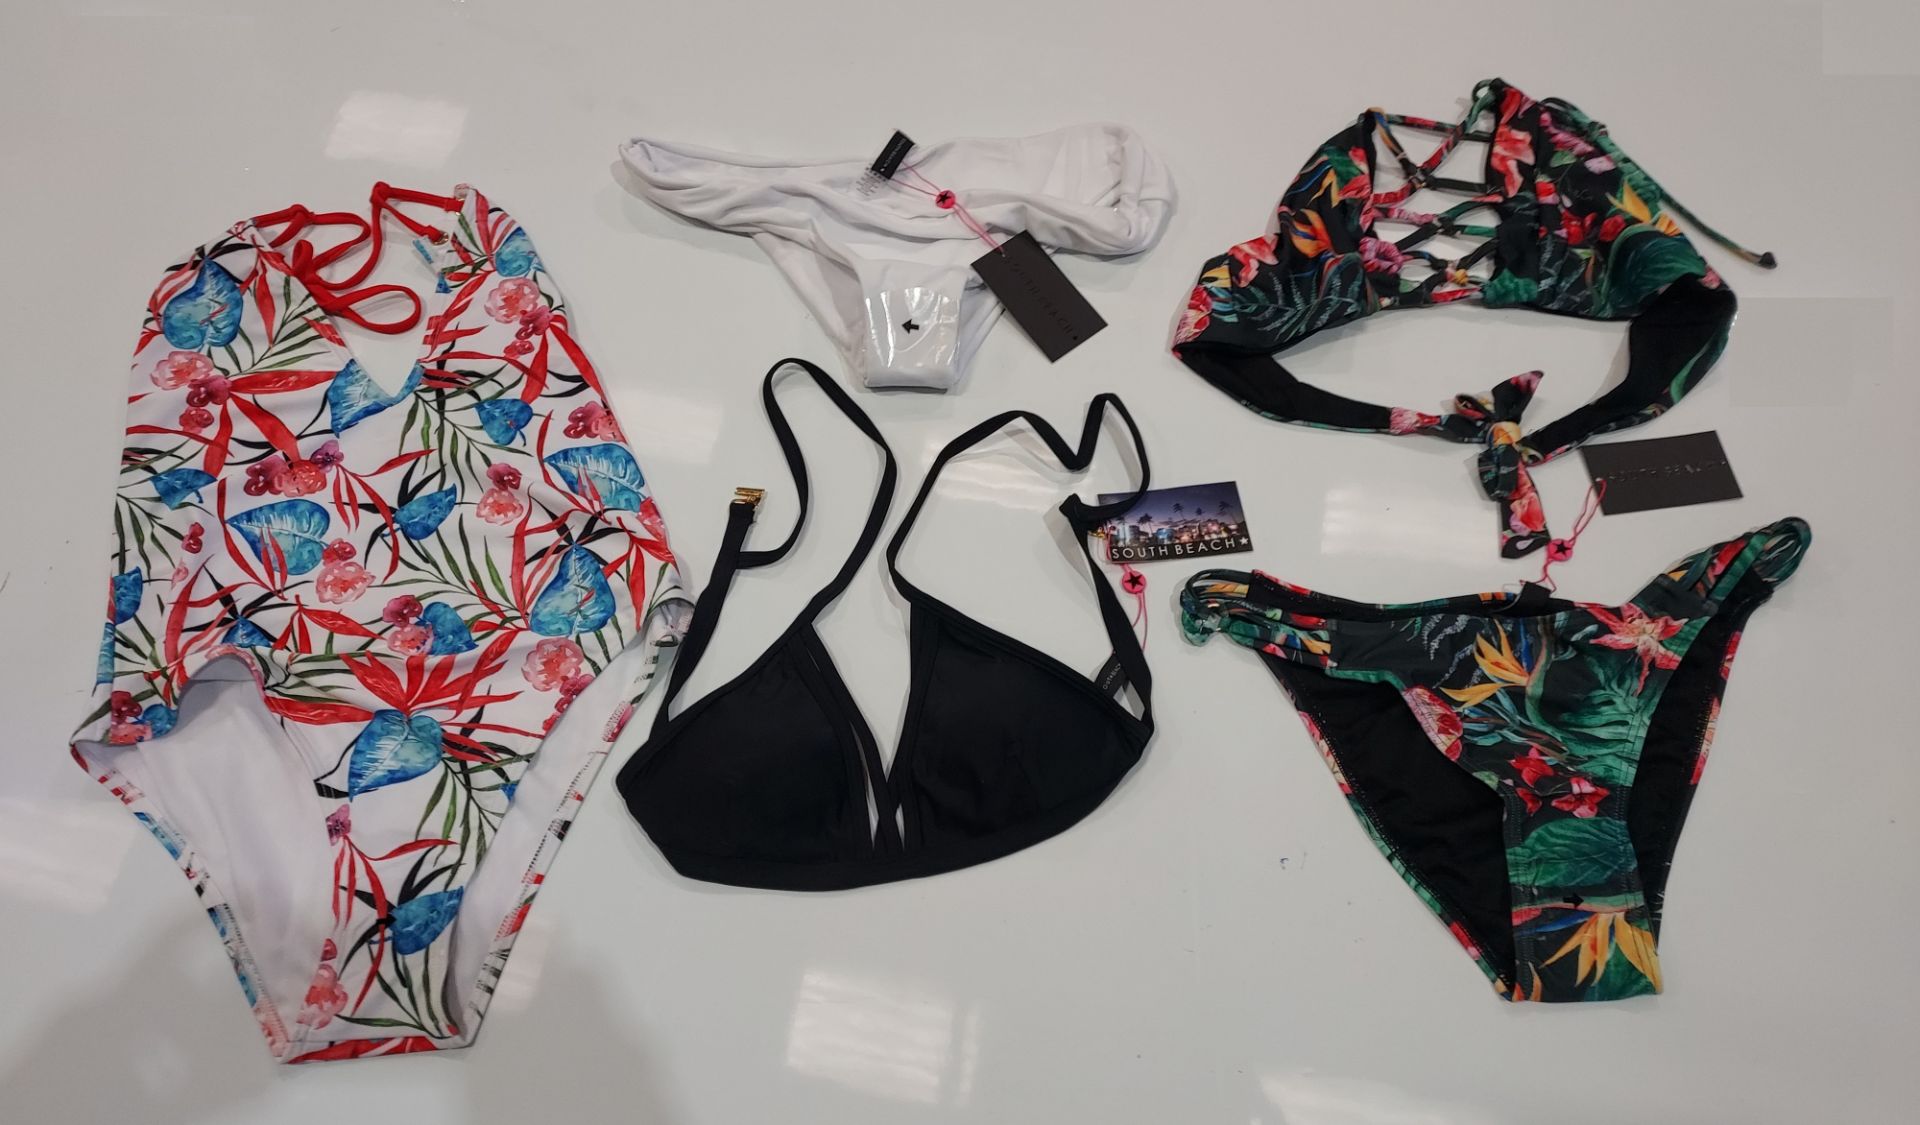 100 X BRAND NEW MIXED CLOTHING LOT CONTAINING SOUTH BEACH DEEP V EMBROIDED TIE SIDE BIKINI BOTTOMS /